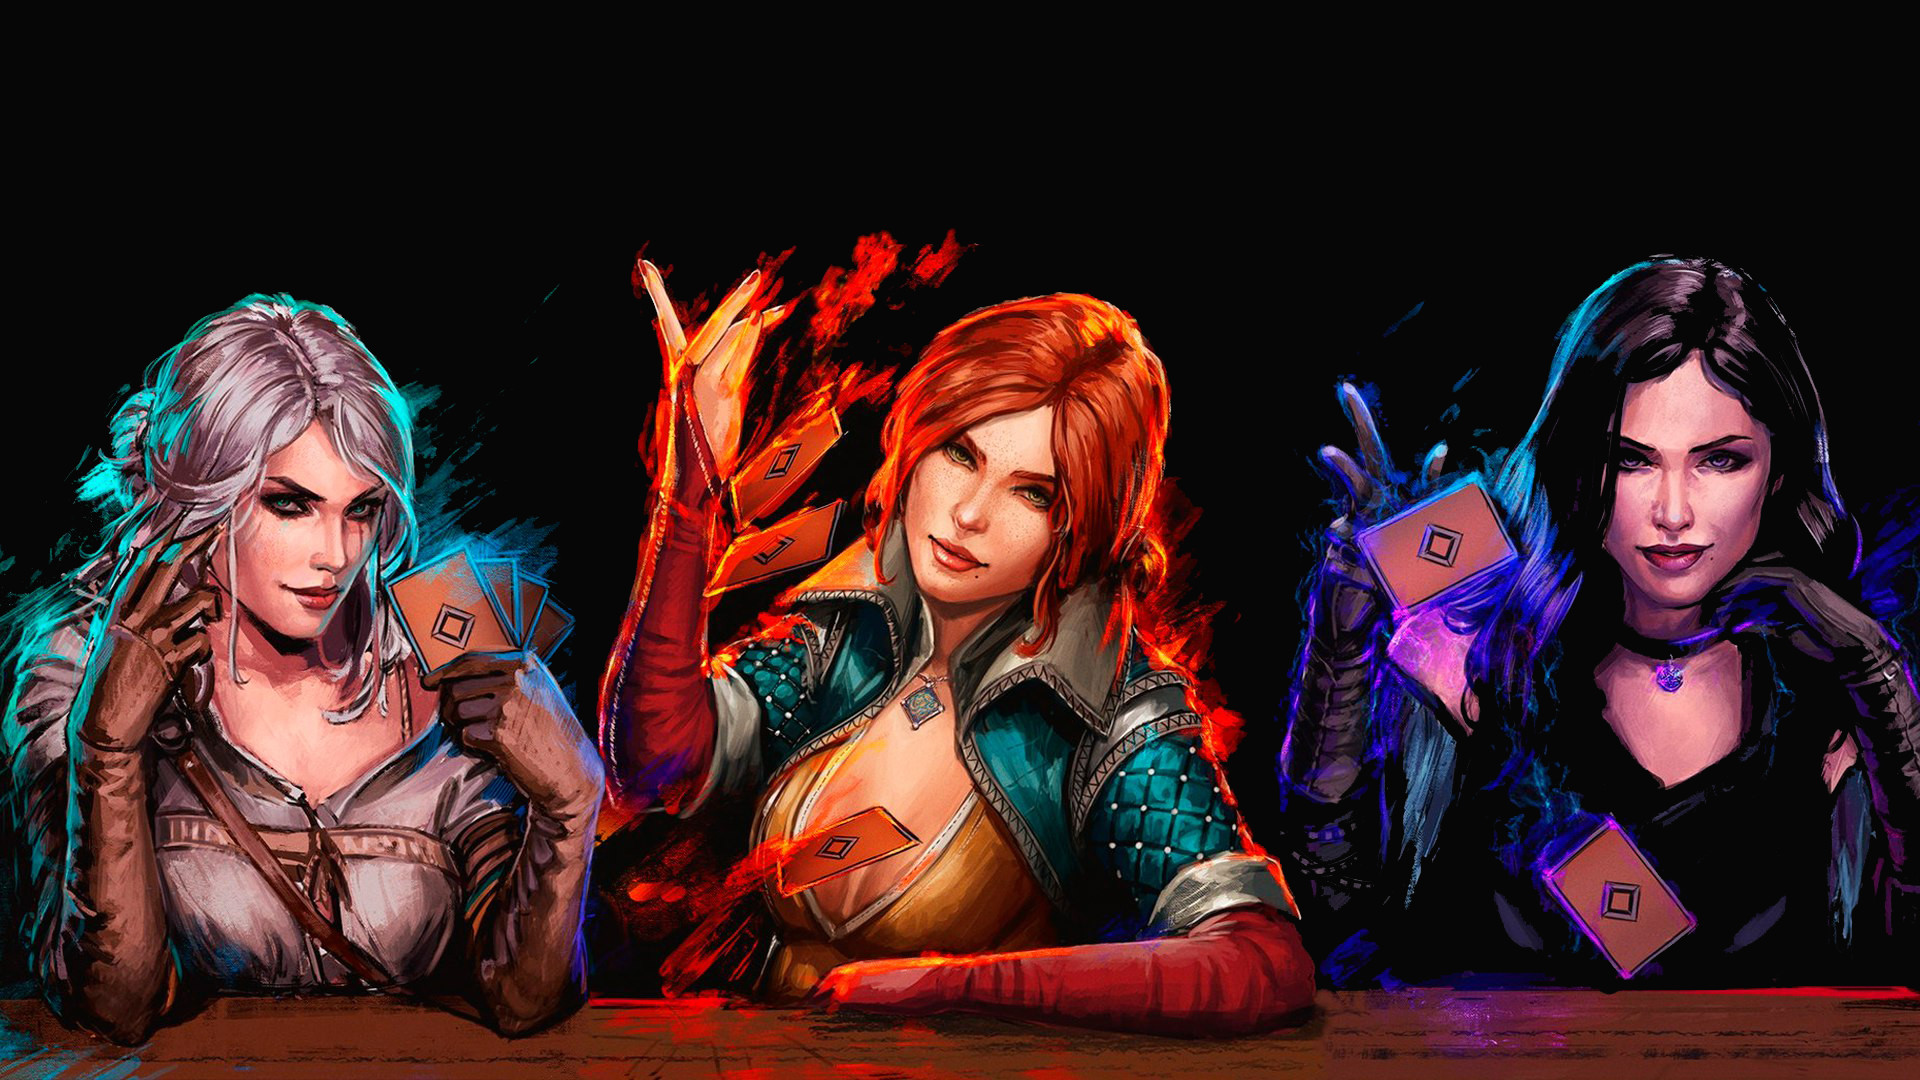 1920x1080 ... Gwent: The Witcher Card Game Wallpaper by Frampos